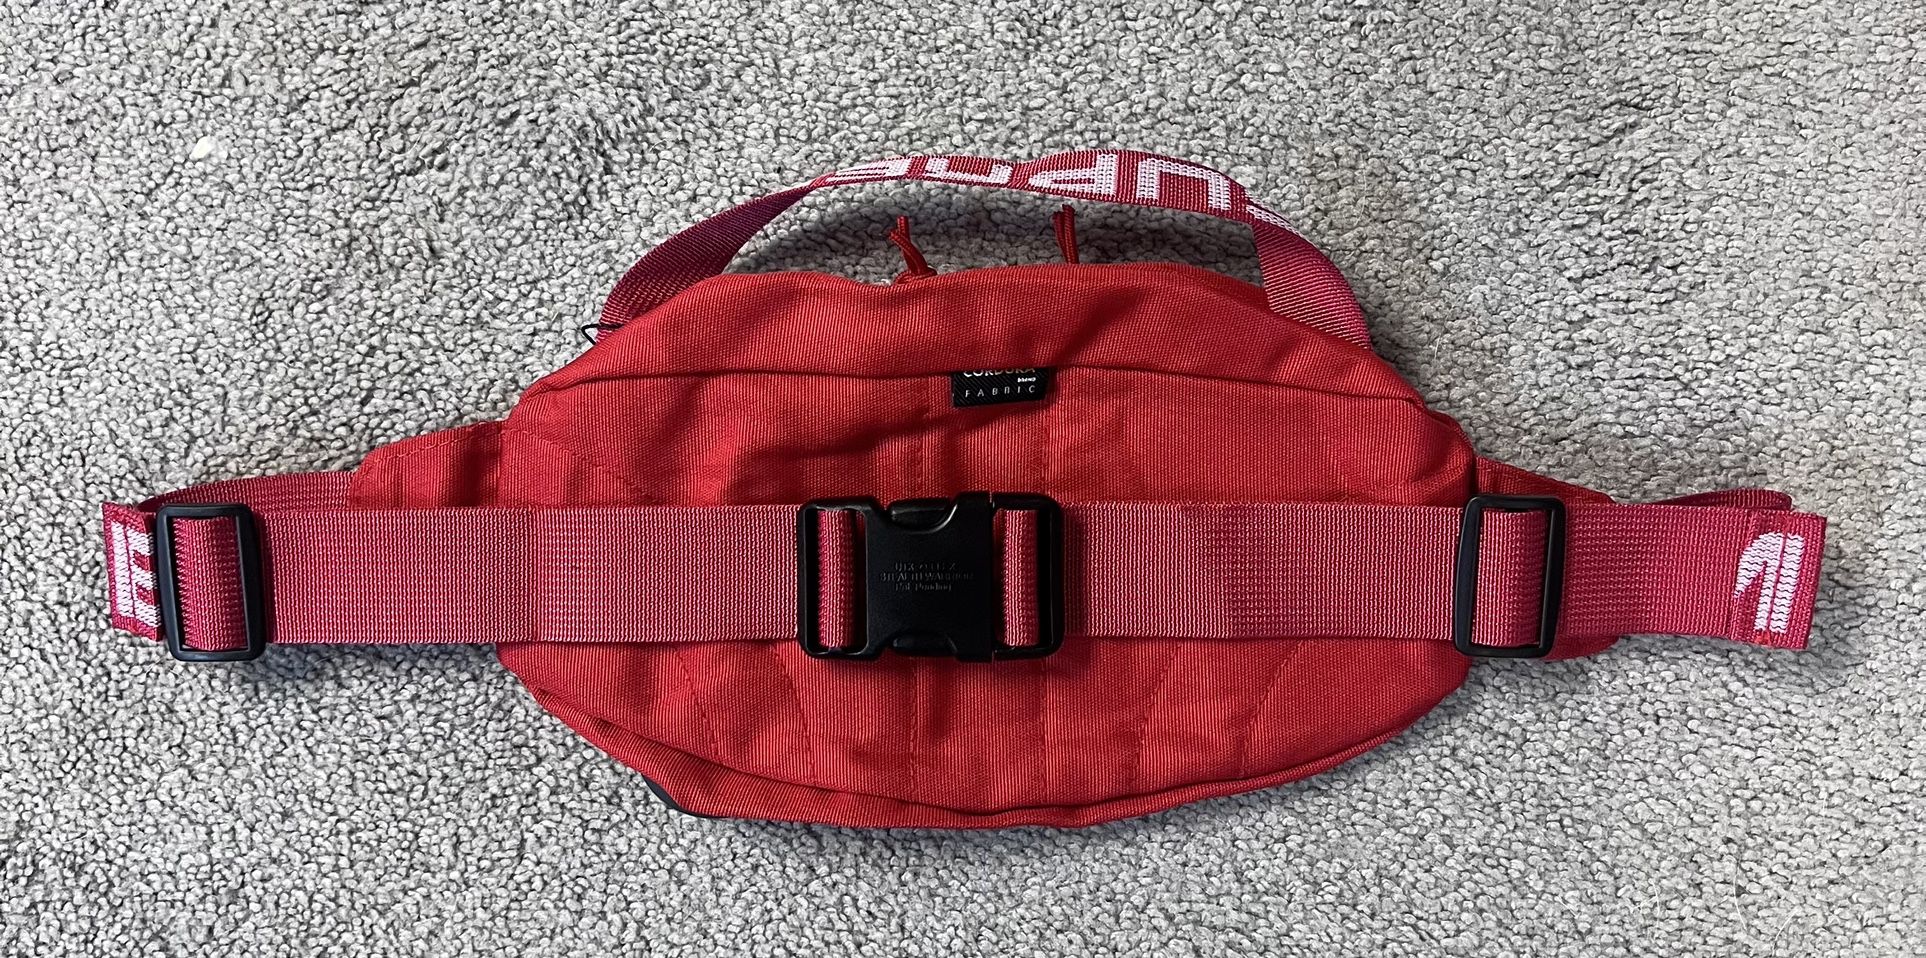 Supreme SS17 Backpack With SS18 Waist Bag Bundle for Sale in Albany, NY -  OfferUp